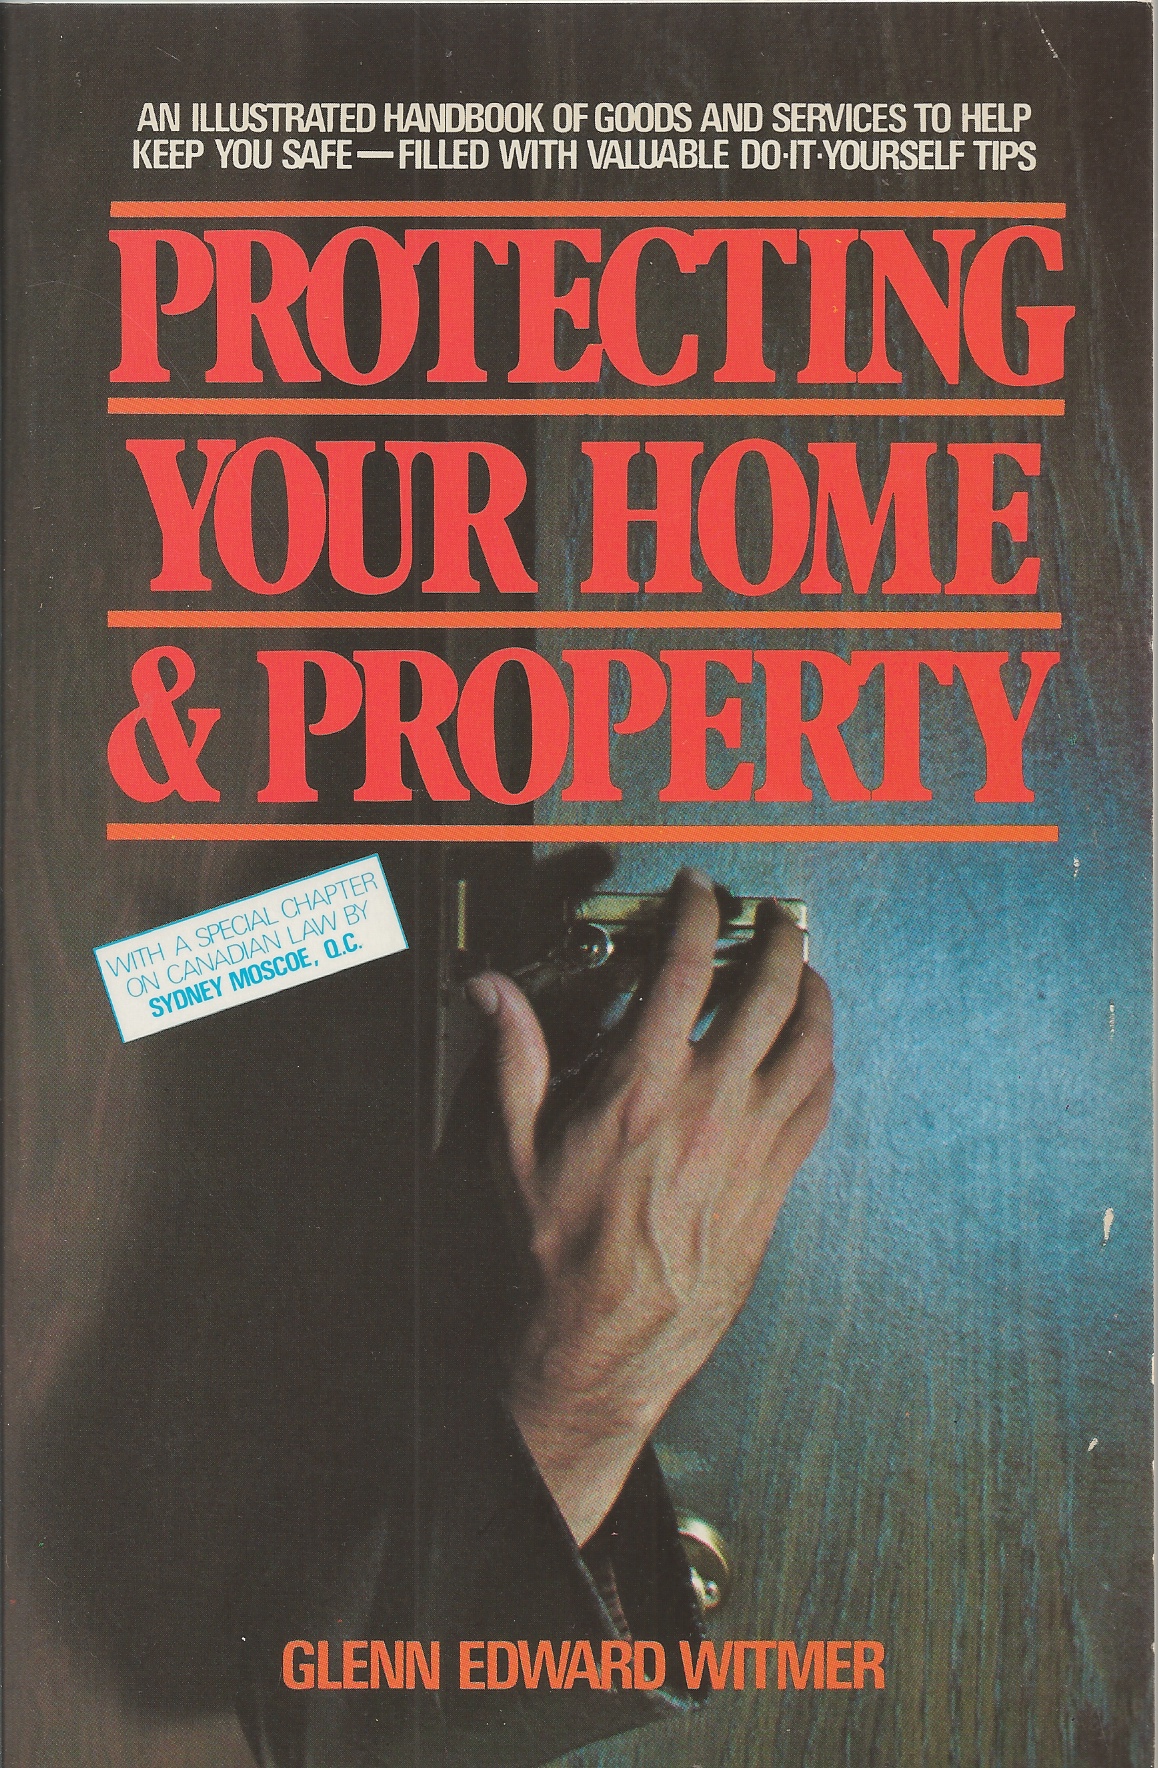 WITMER GLENN EDWARD - Protecting Your Home & Property